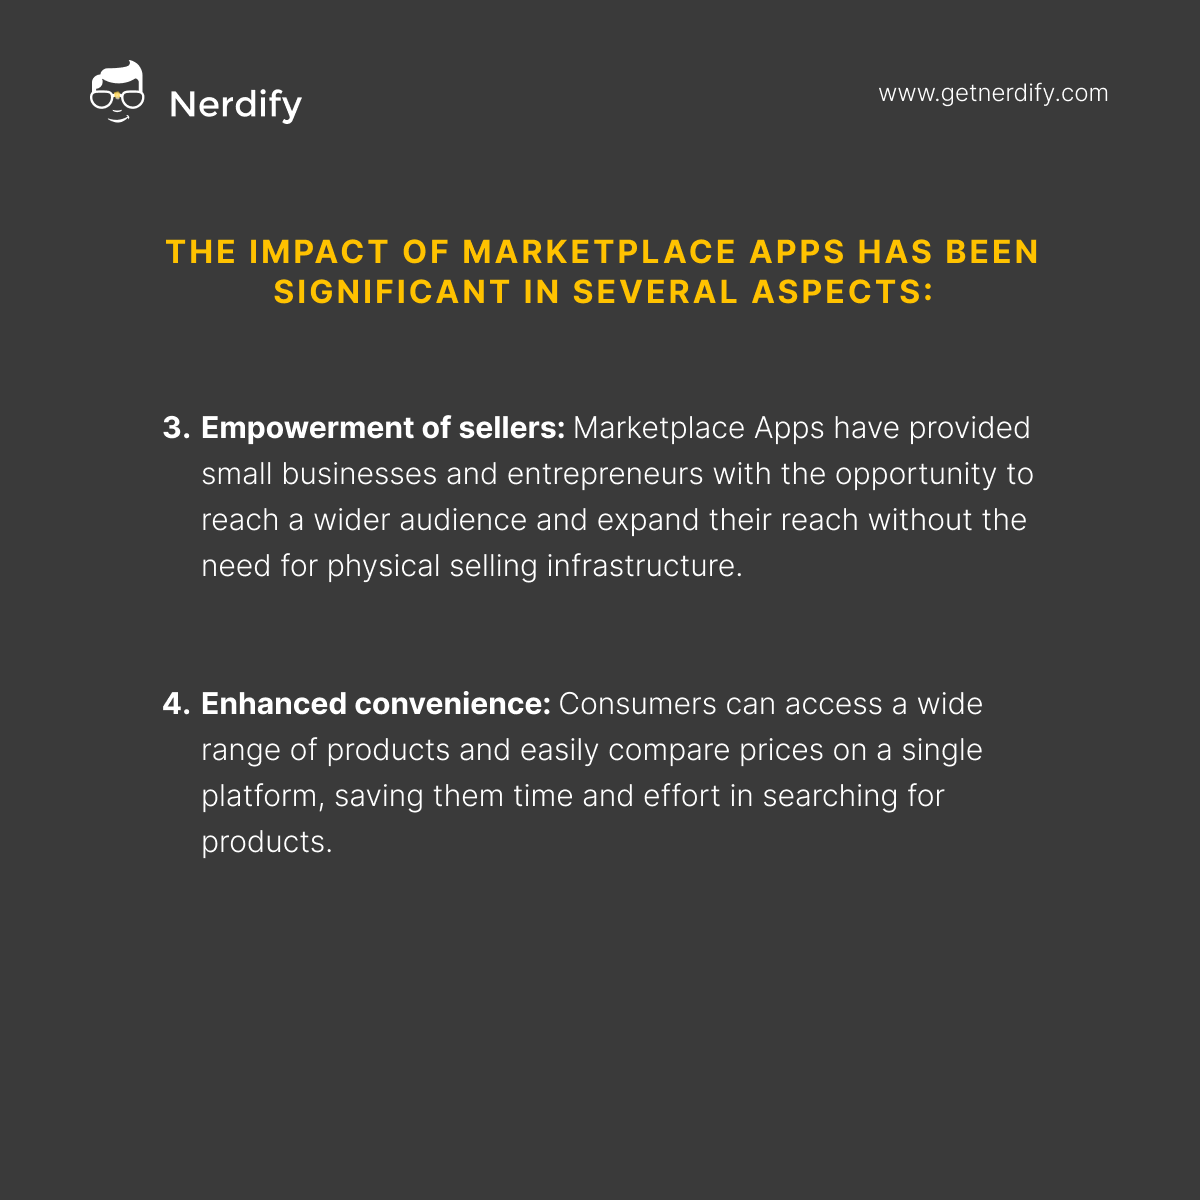 Have you ever wondered how Marketplace apps work on your phone? These mobile applications allow you to explore, buy, and sell a wide variety of products and services, all from the palm of your hand! 📱💼

#GetNerdify #Nerdify #Webdevelopment #MarketplaceApp